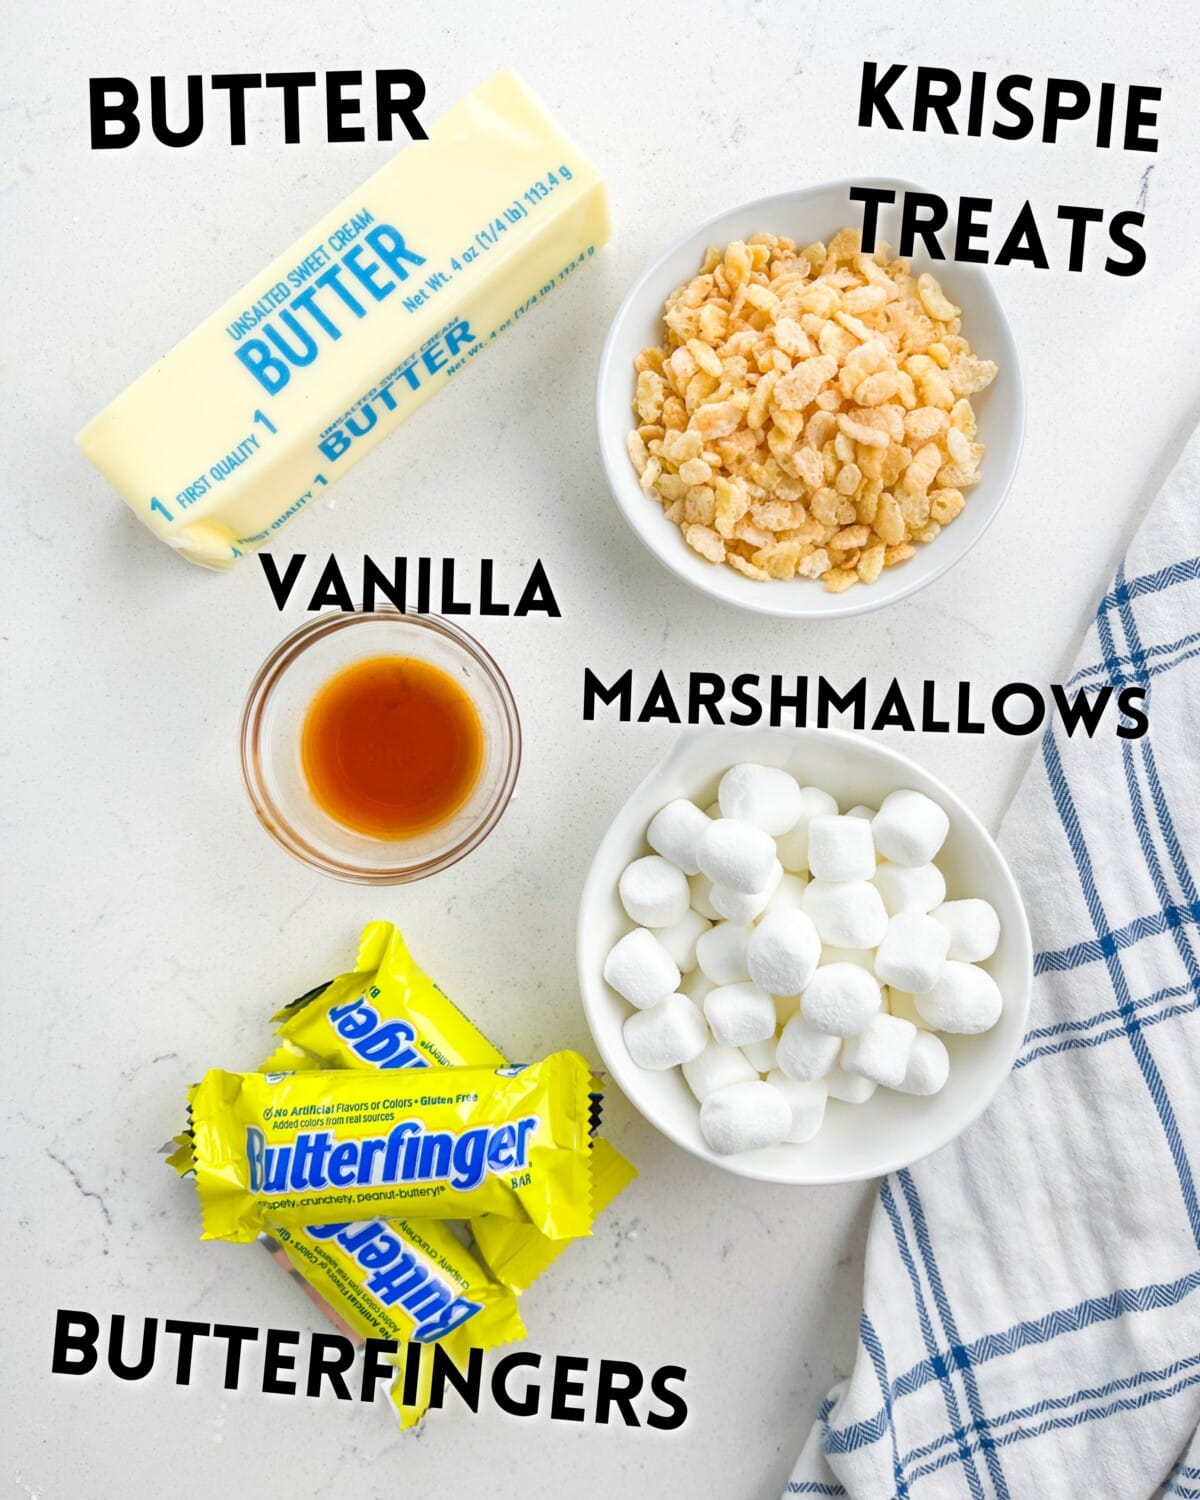 ingredients in butterfinger Krispie treats laid out on a white counter.